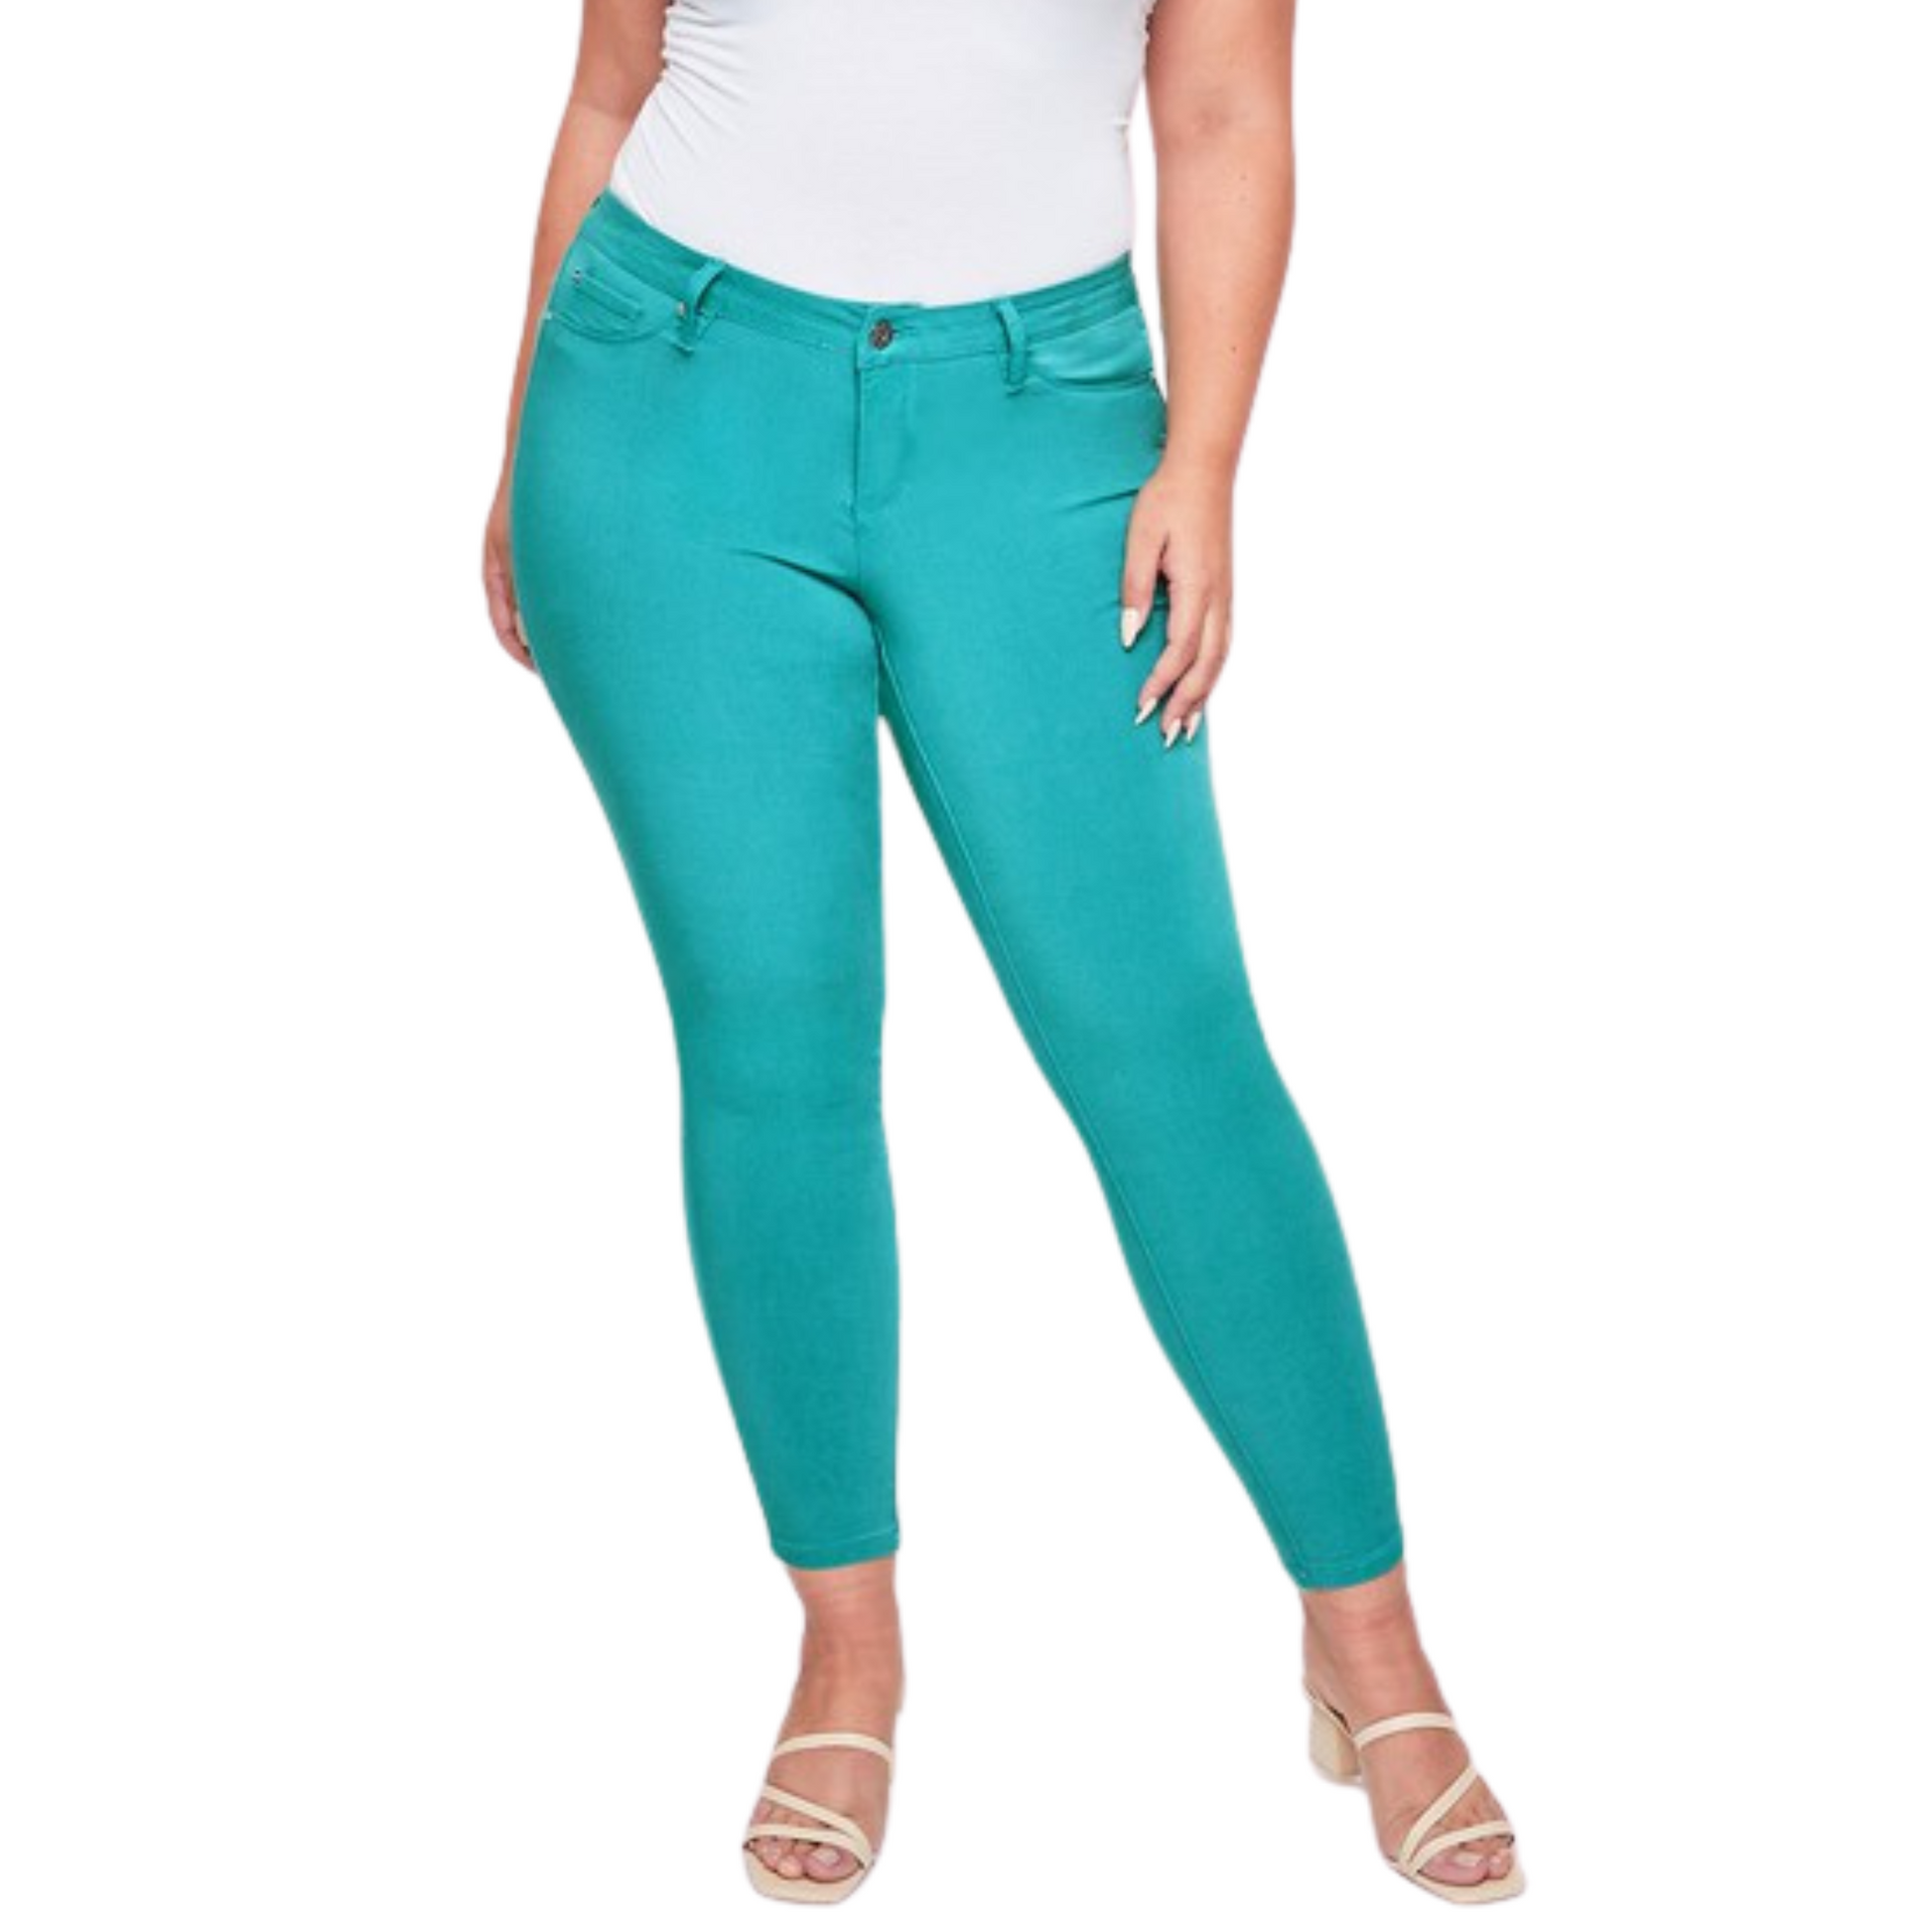 The Women's Hyper Stretch Skinny Jeans are designed for optimal comfort and a flattering fit. Made with Hyper Stretch technology, these plus size jeans are available in a variety of colors and provide superior comfort and flexibility. Whether you are heading out for a day of errands or lounging at home, these jeans are the ideal choice for style and comfort.